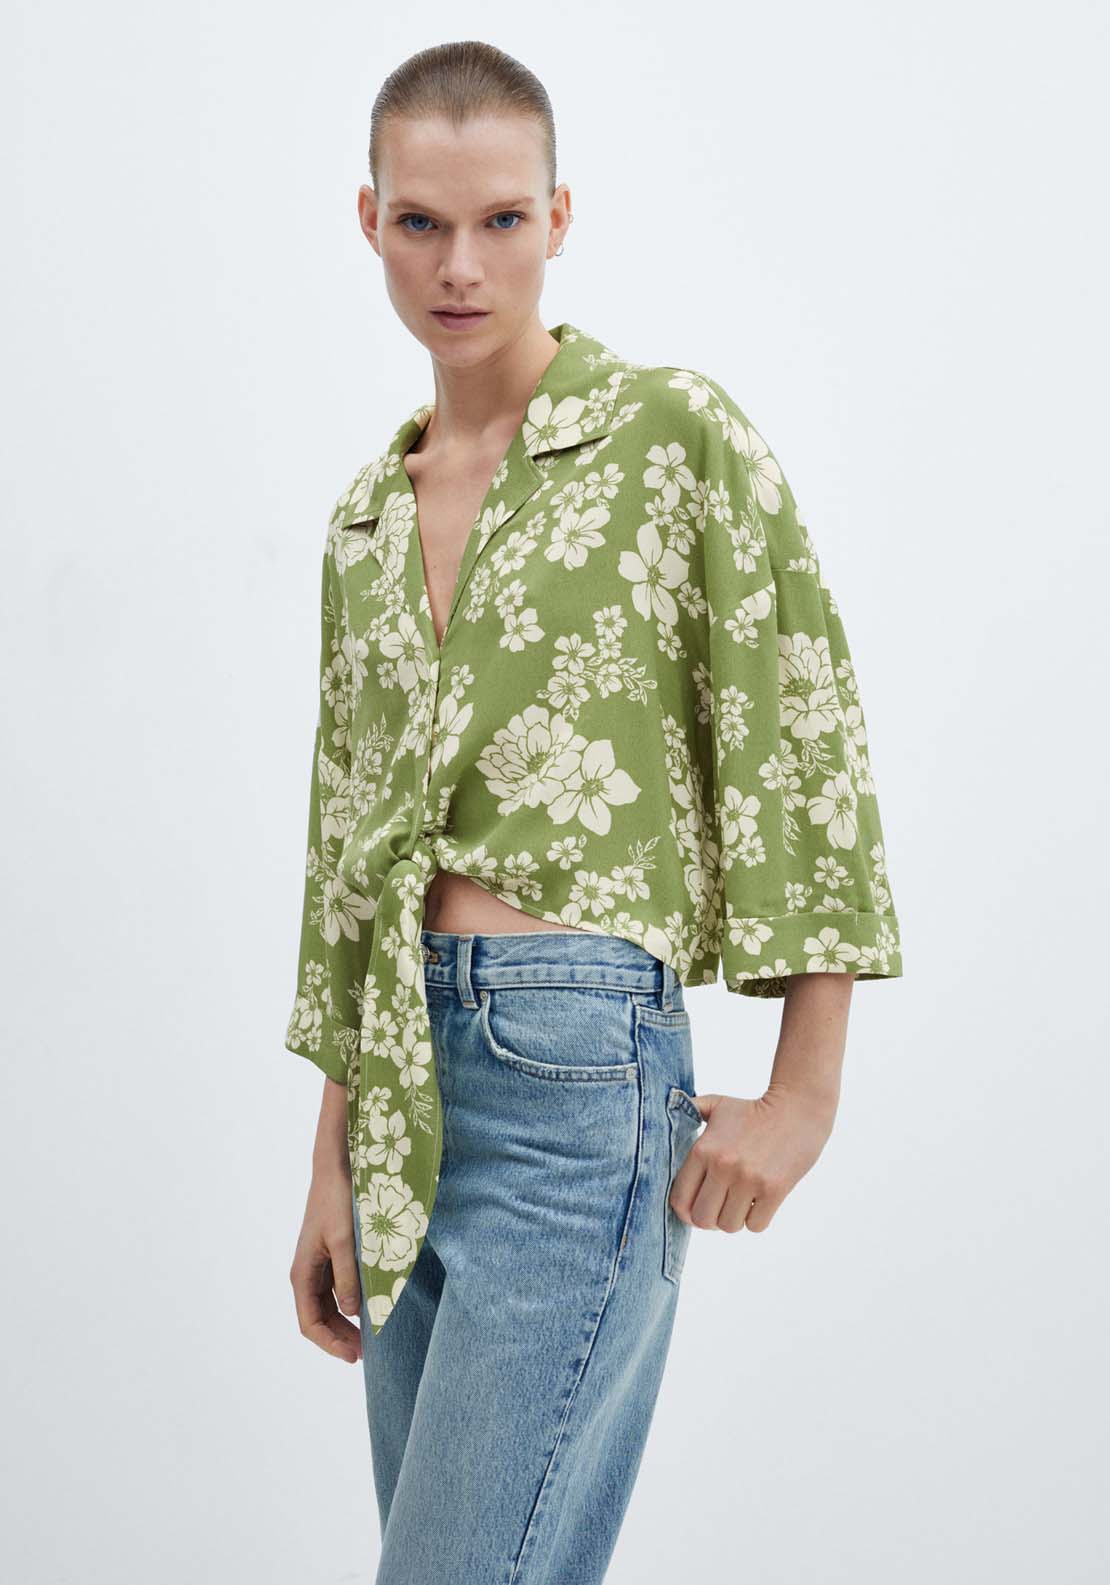 Mango Floral shirt with knot 1 Shaws Department Stores